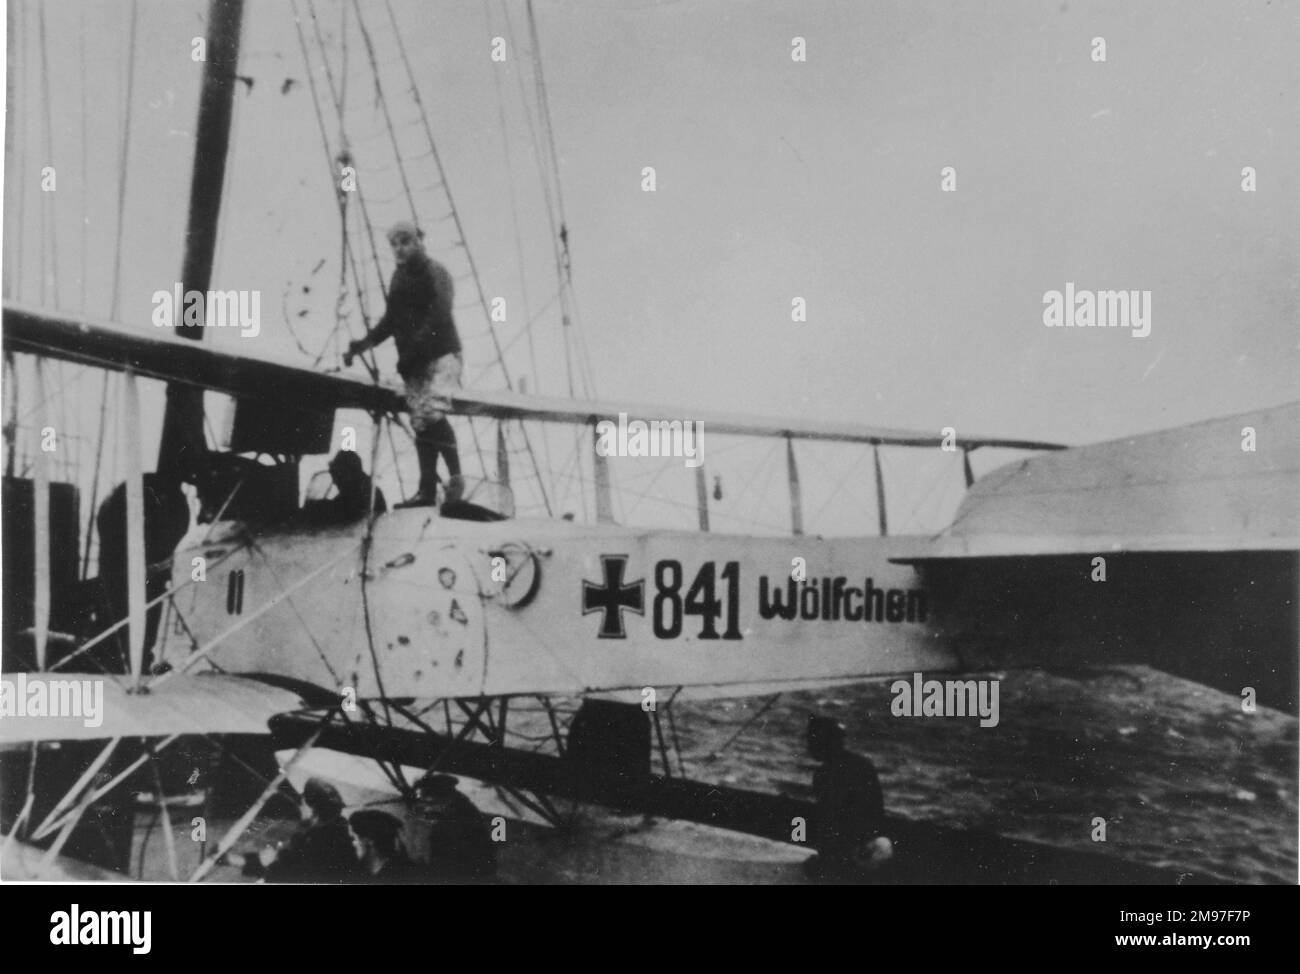 Friedrichshafen FF 33E German scout plane (serial no. 841), nicknamed the Wolfchen (Baby Wolf), seen here on a ship's hoist on 6 March 1918.  The plane carried out reconnaissance for the German merchant raider, SMS Wolf, from 30 November 1916 for a period of 15 months, when it flew without the national markings seen here. Stock Photo